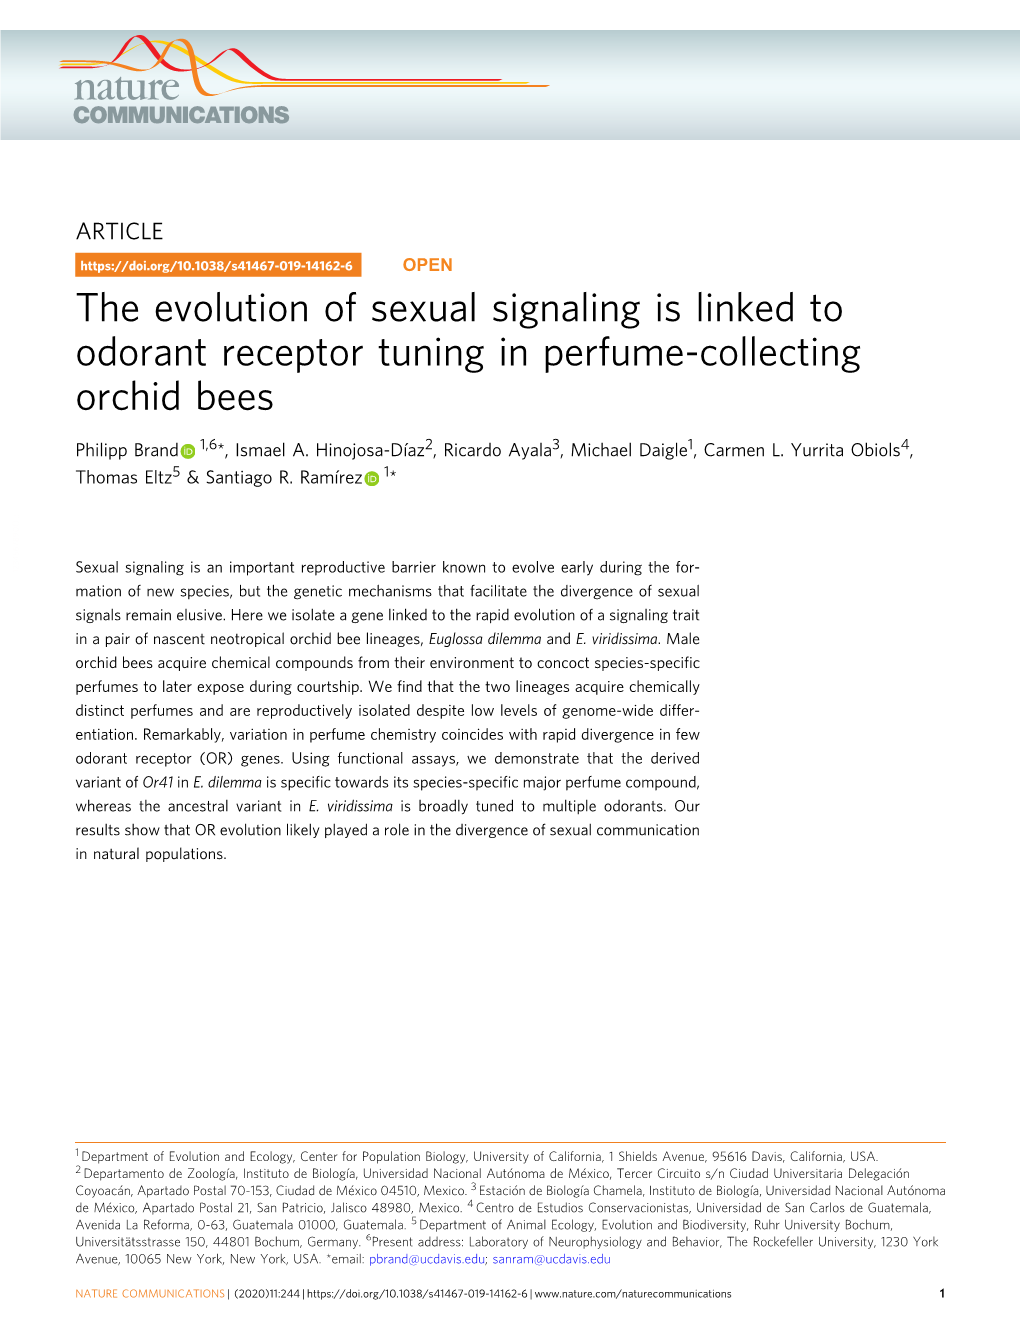 The Evolution of Sexual Signaling Is Linked to Odorant Receptor Tuning in Perfume-Collecting Orchid Bees